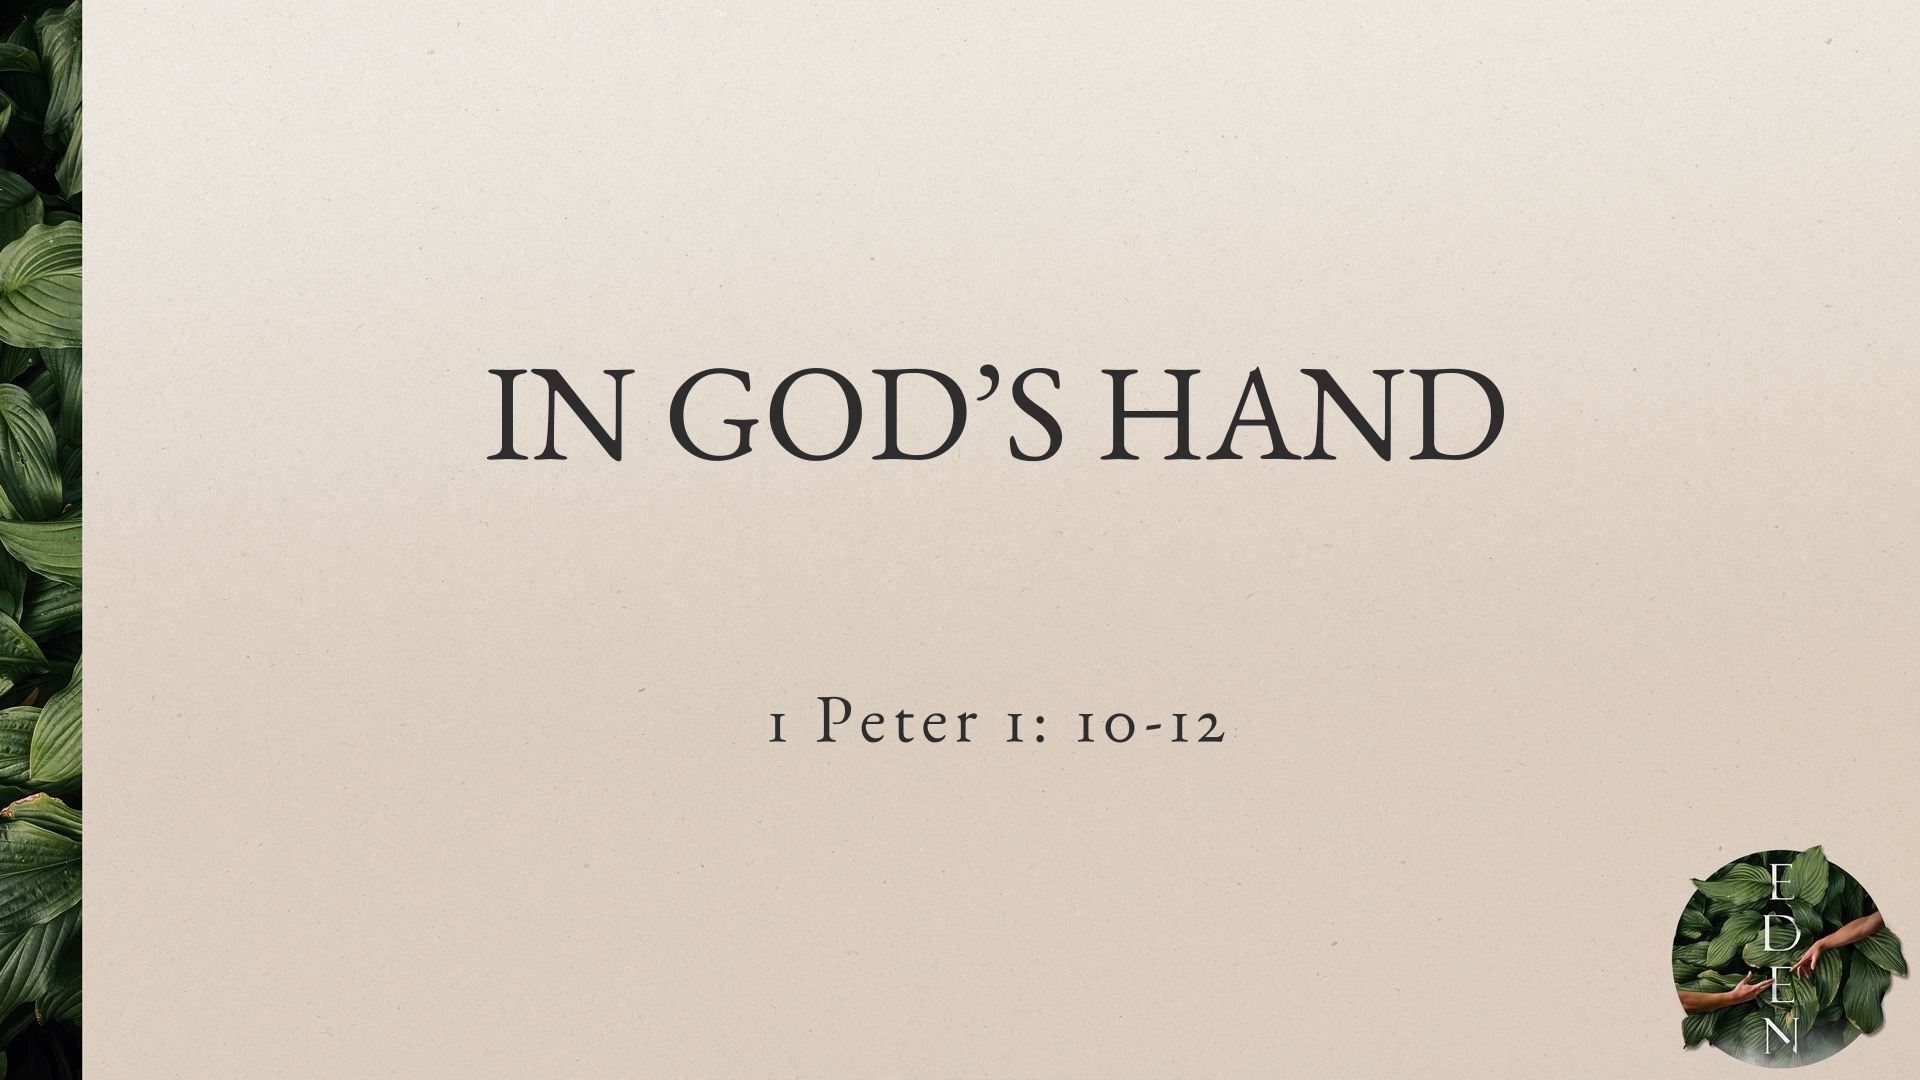 Sep 04, 2022 - In God' Hand (Video) - 1 Peter 1: 10-12